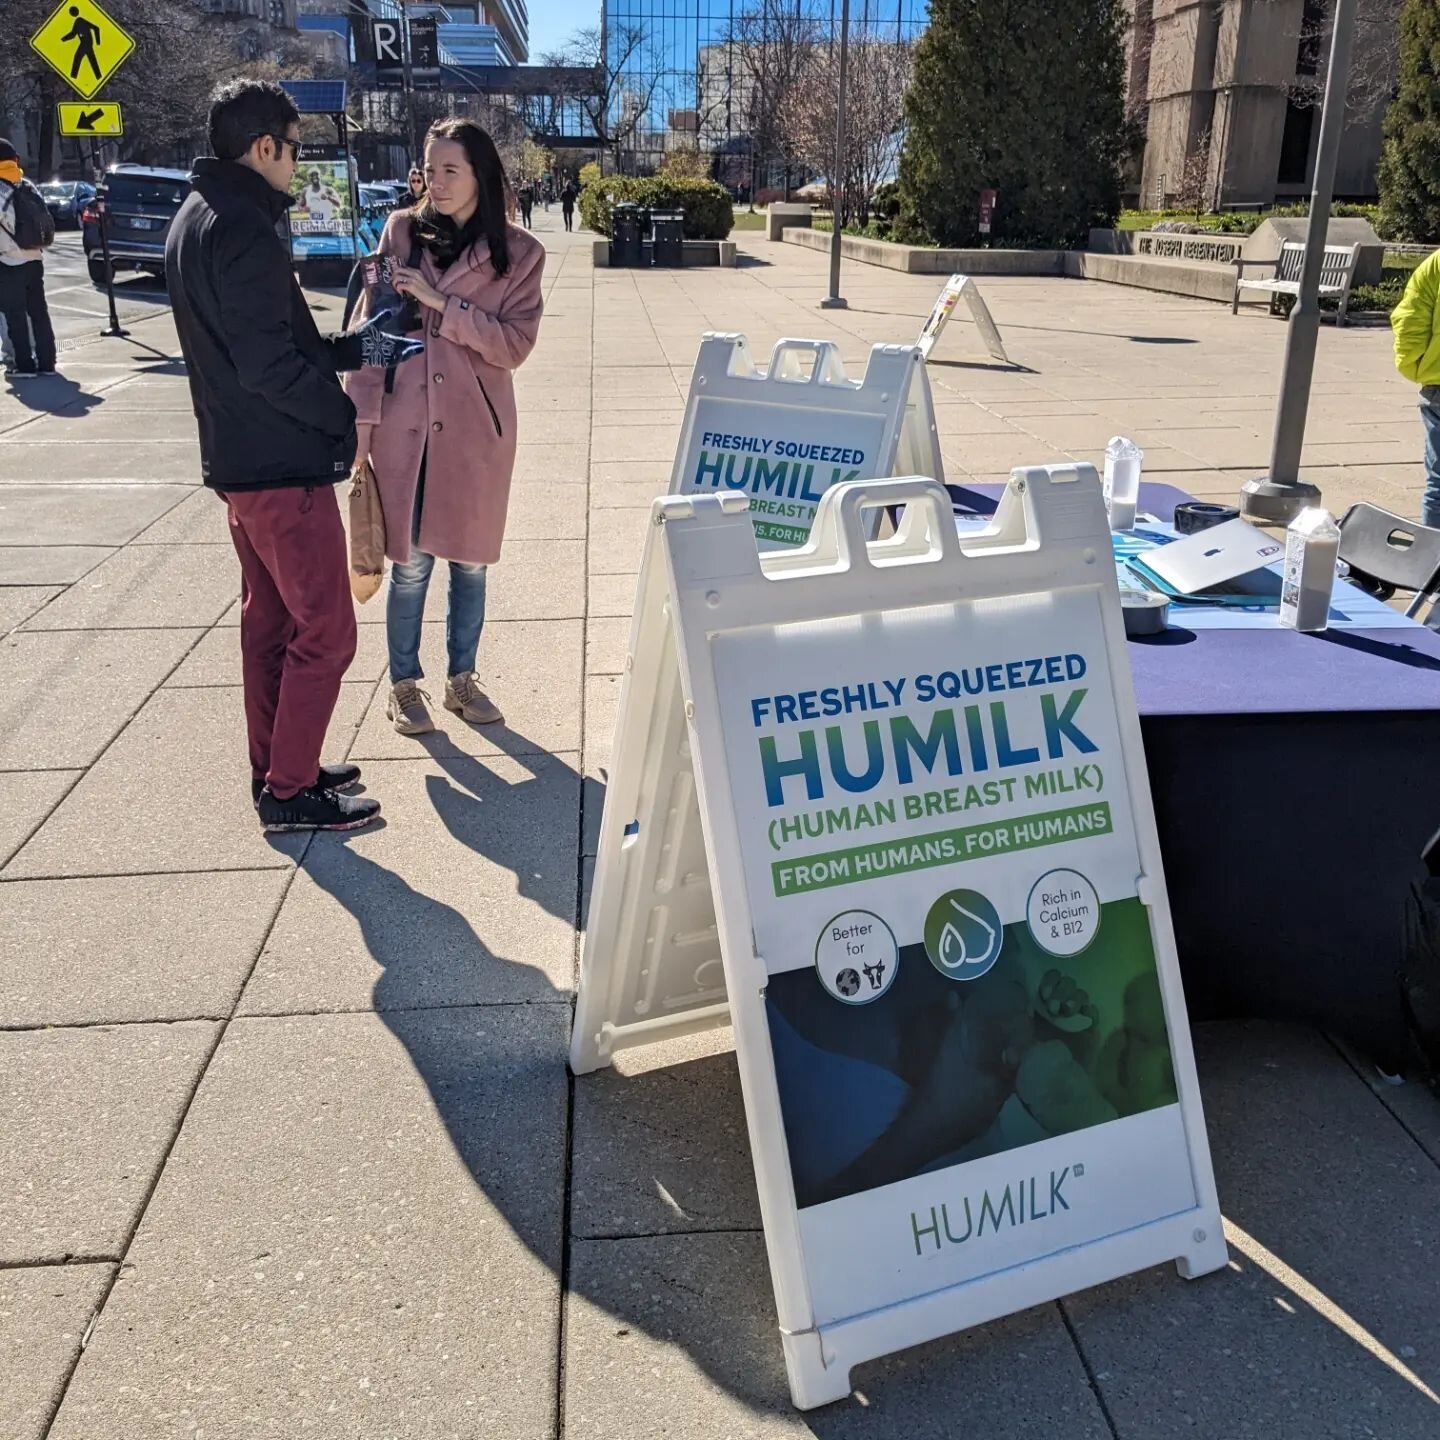 Our HuMilk is cage free, grass fed and sustainable. Stop by Cobb Gate for a free sample!